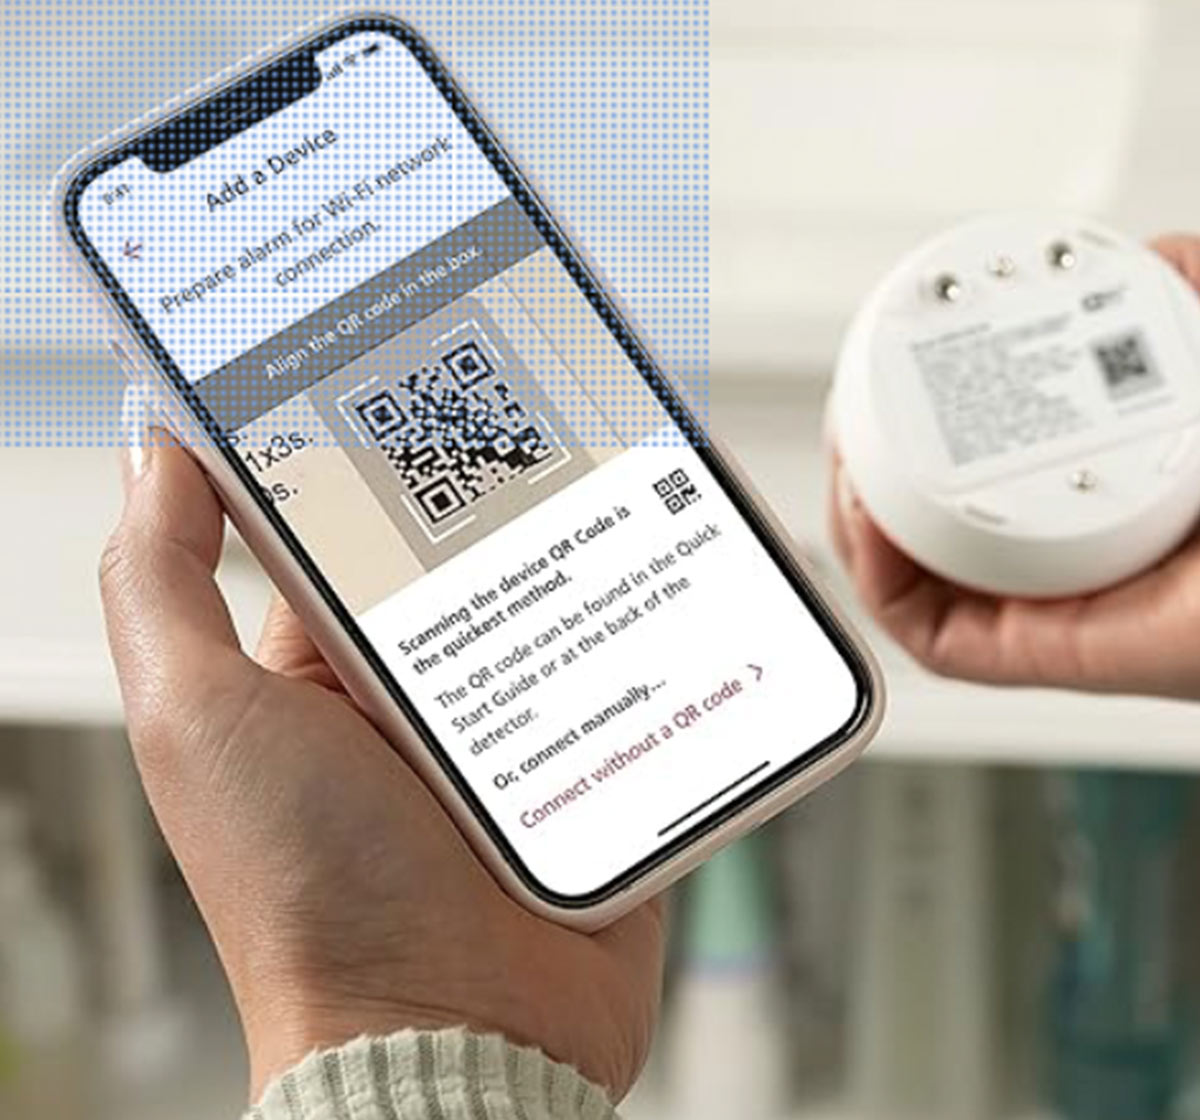 close view of a hand holding a smartphone displaying a QR code for Wi-Fi connection screen